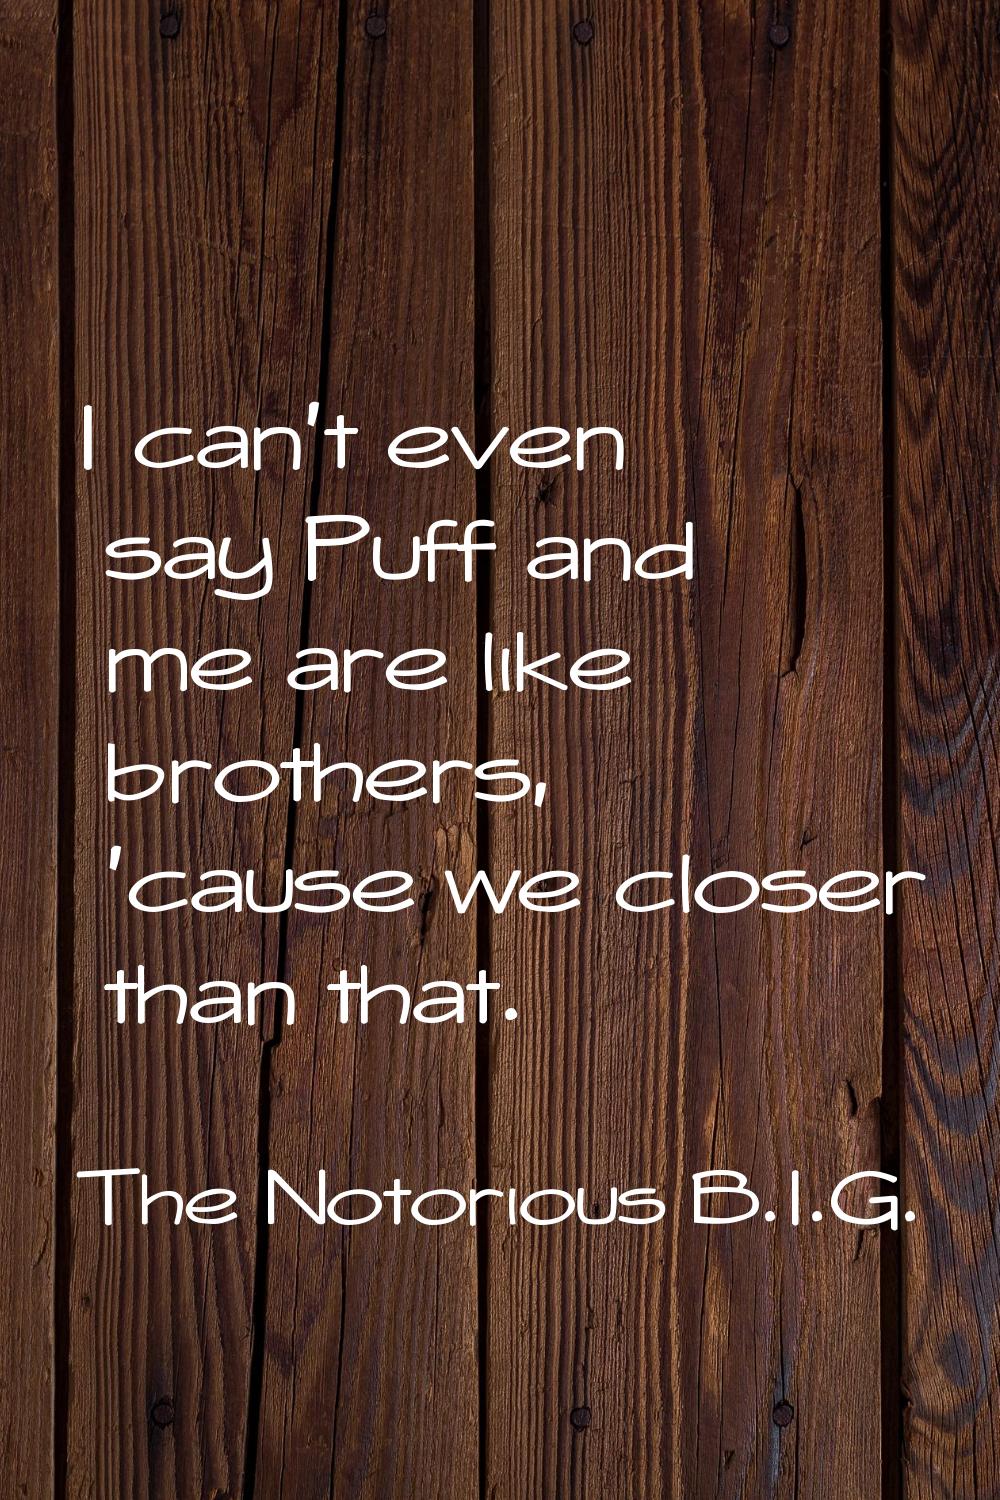 I can't even say Puff and me are like brothers, 'cause we closer than that.